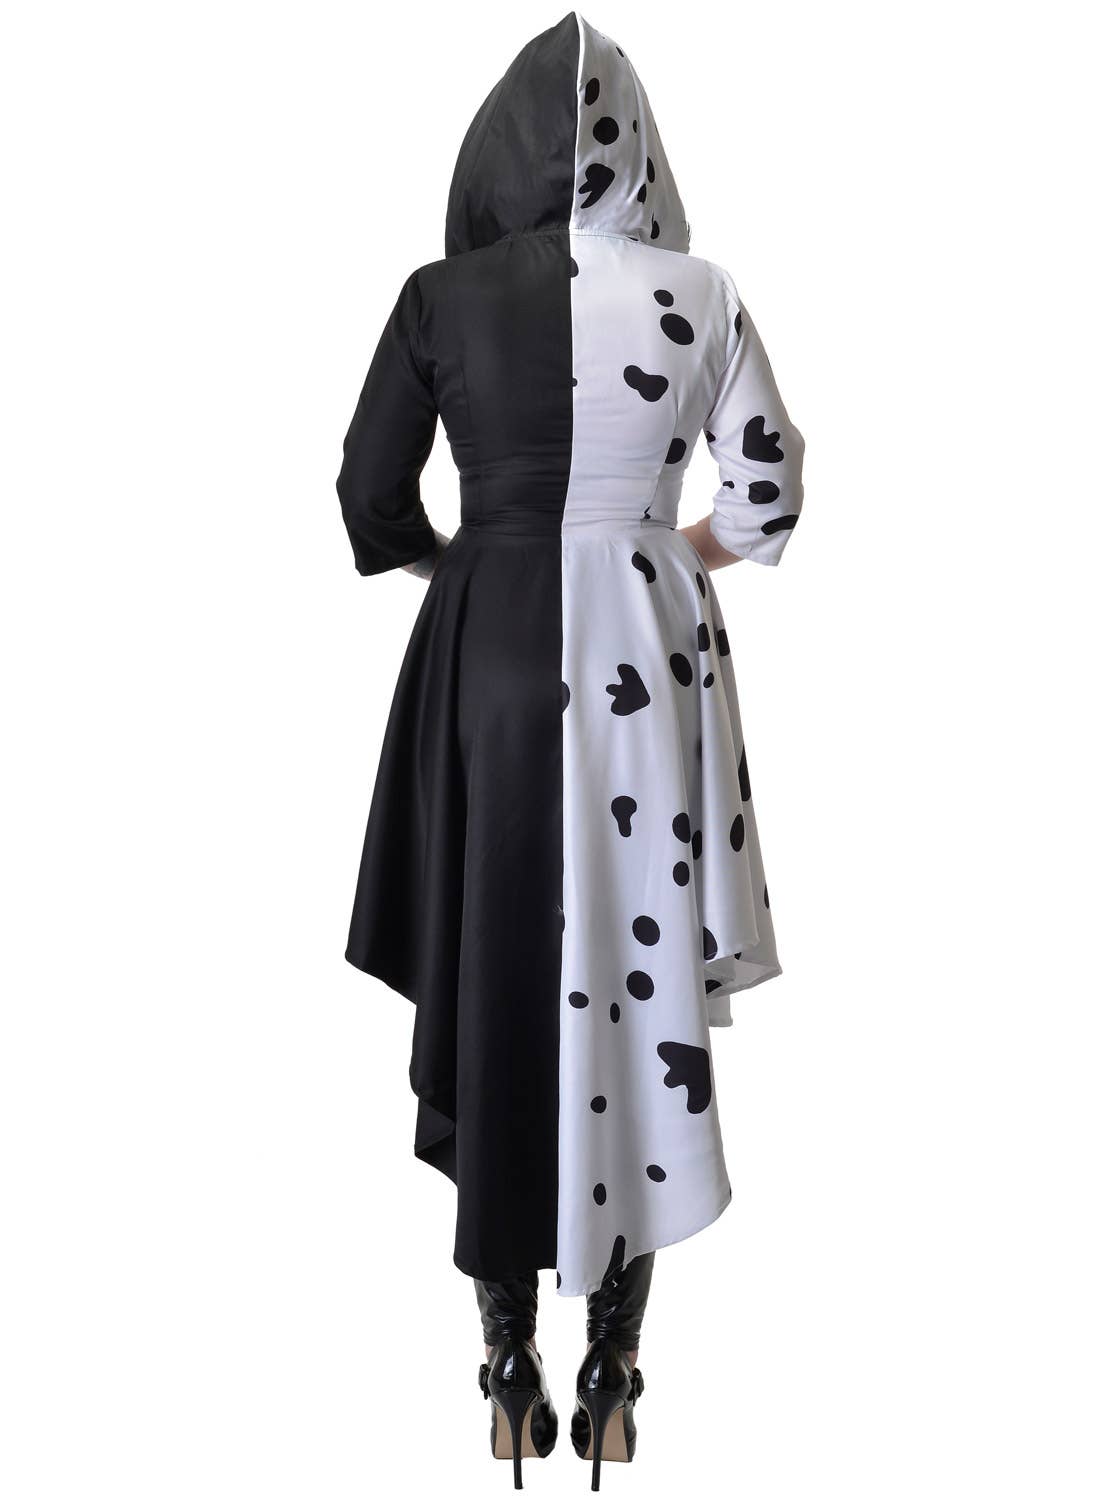 Image of Deluxe Hooded Dalmatian Diva Women's Costume - Back View with Hood Up